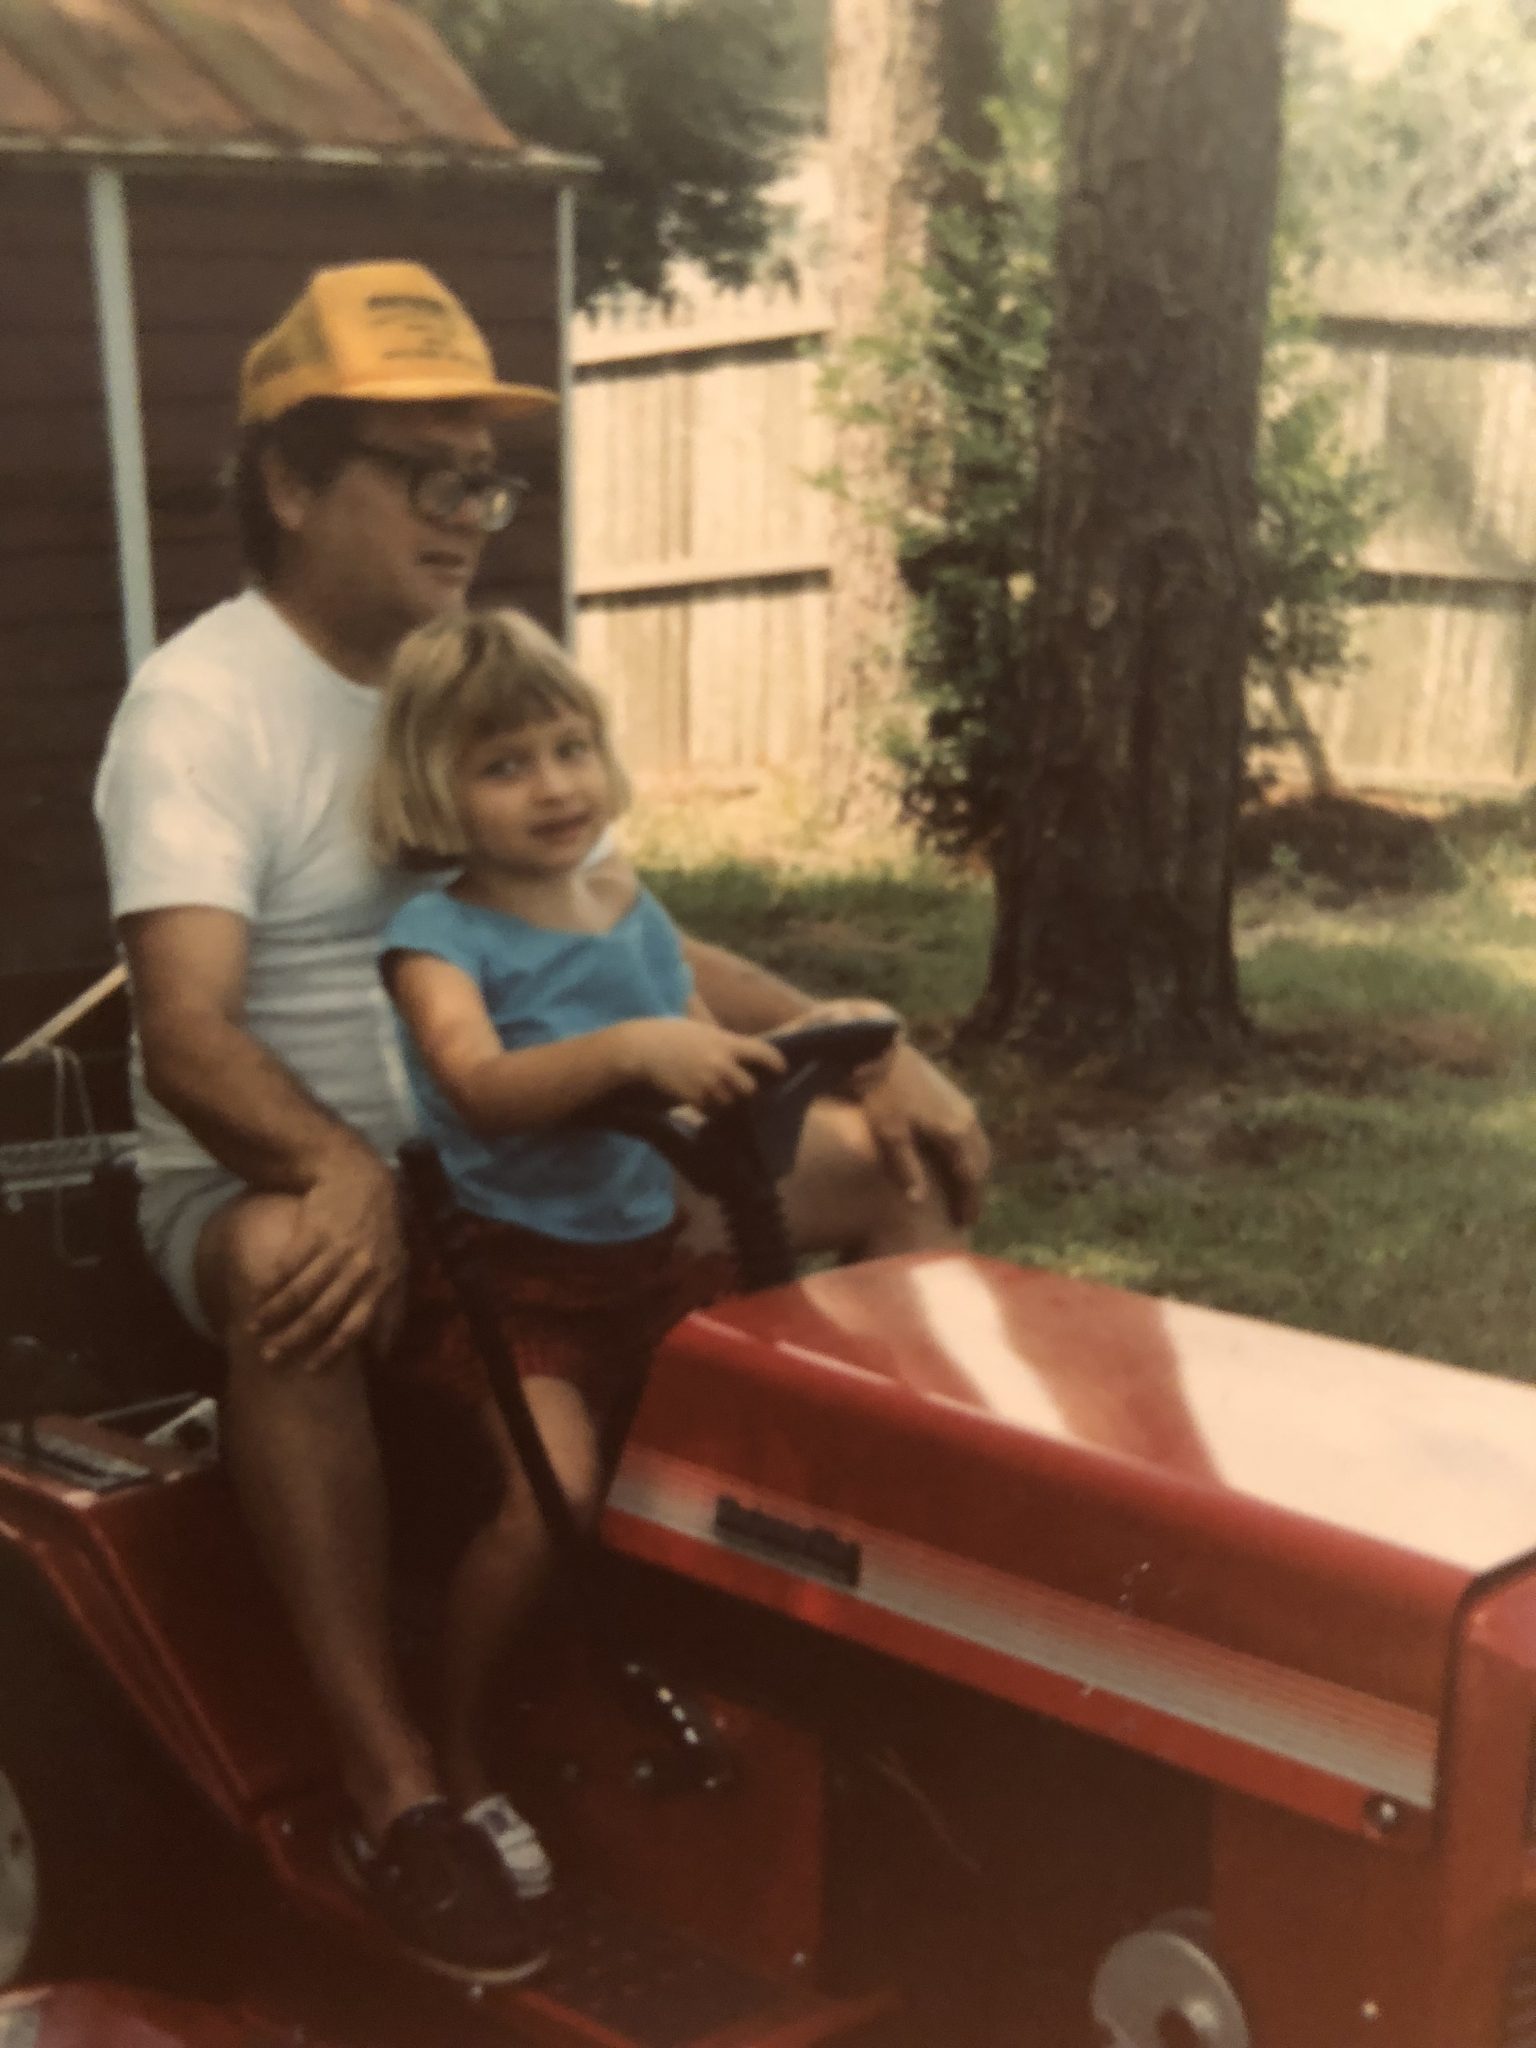 My dad and I riding our beloved lawnmower.